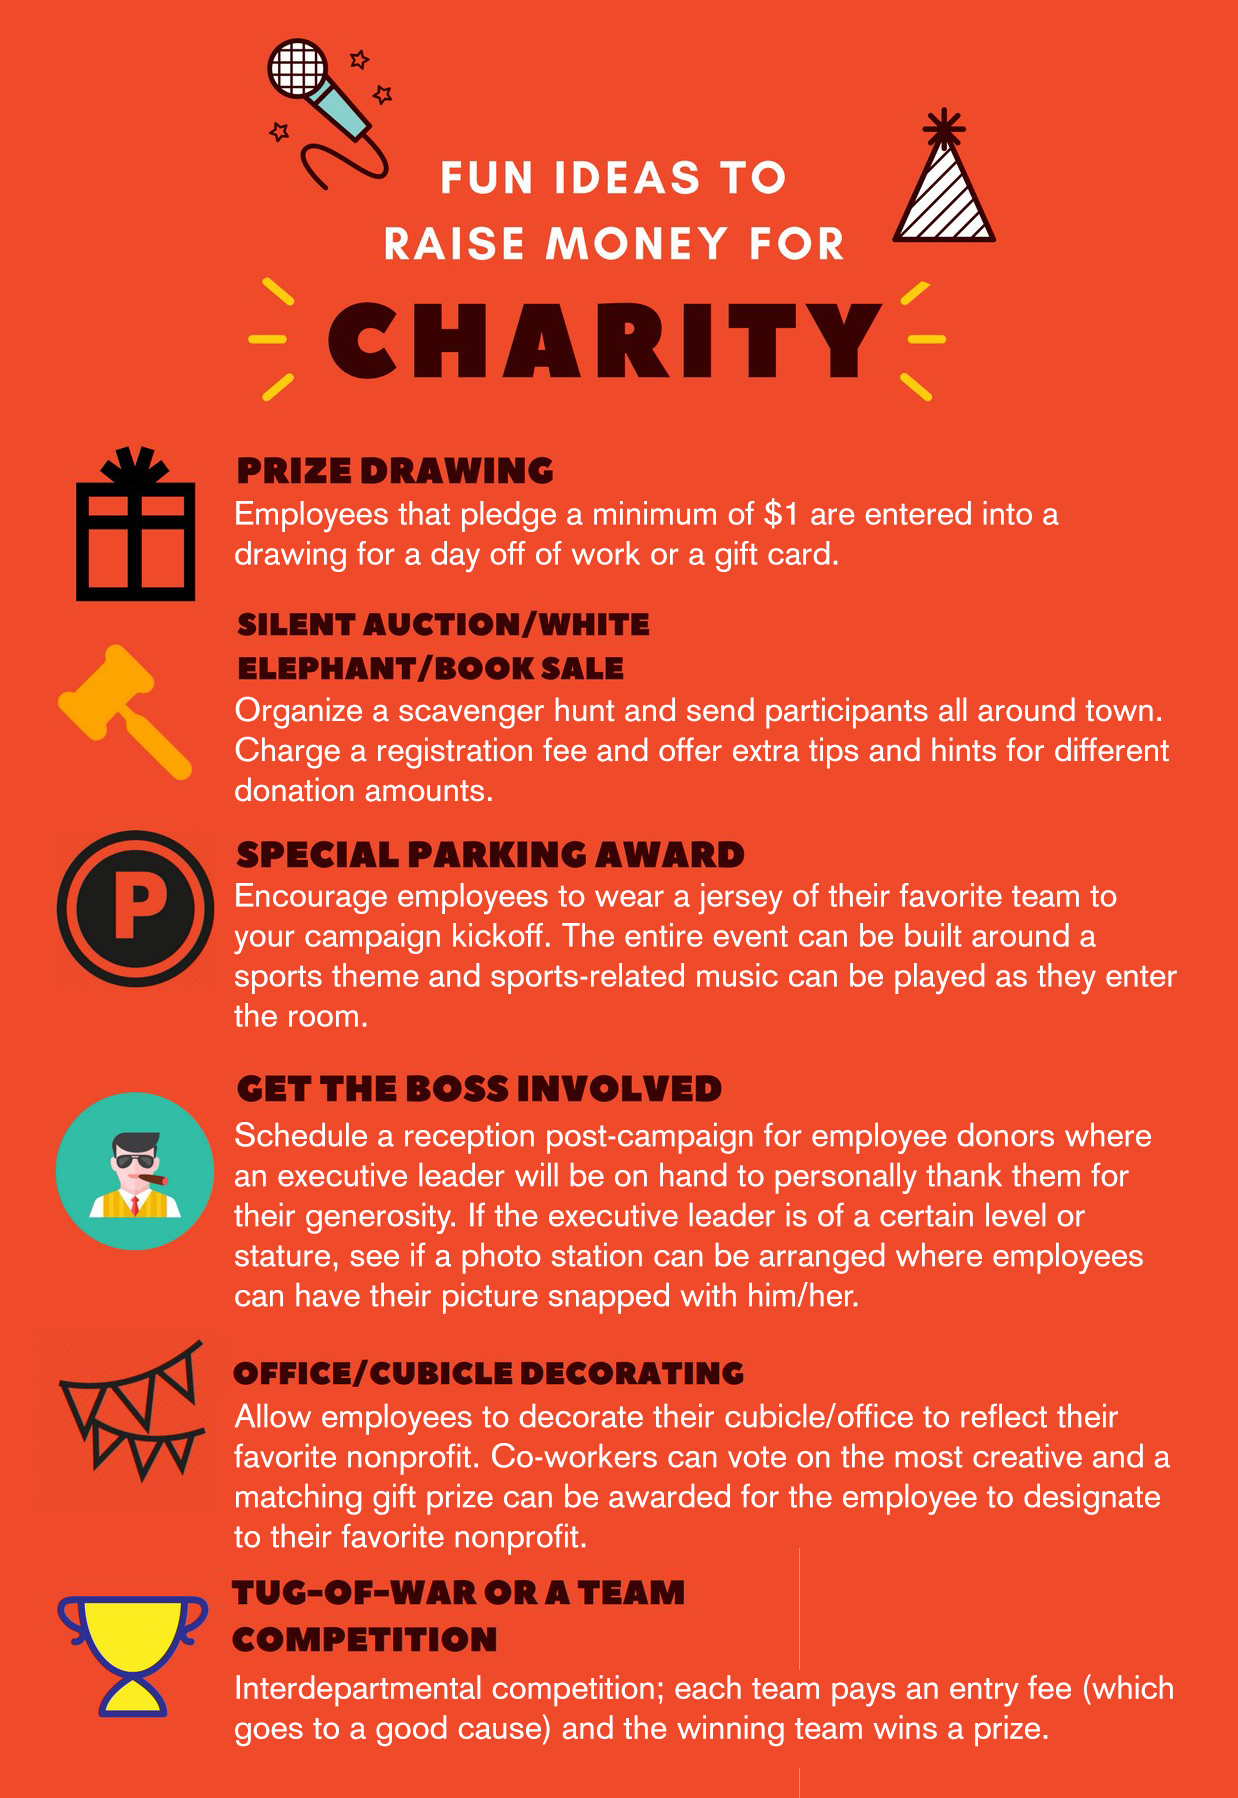 Fun Ideas For Engaging Employees And Raising Money For Charity